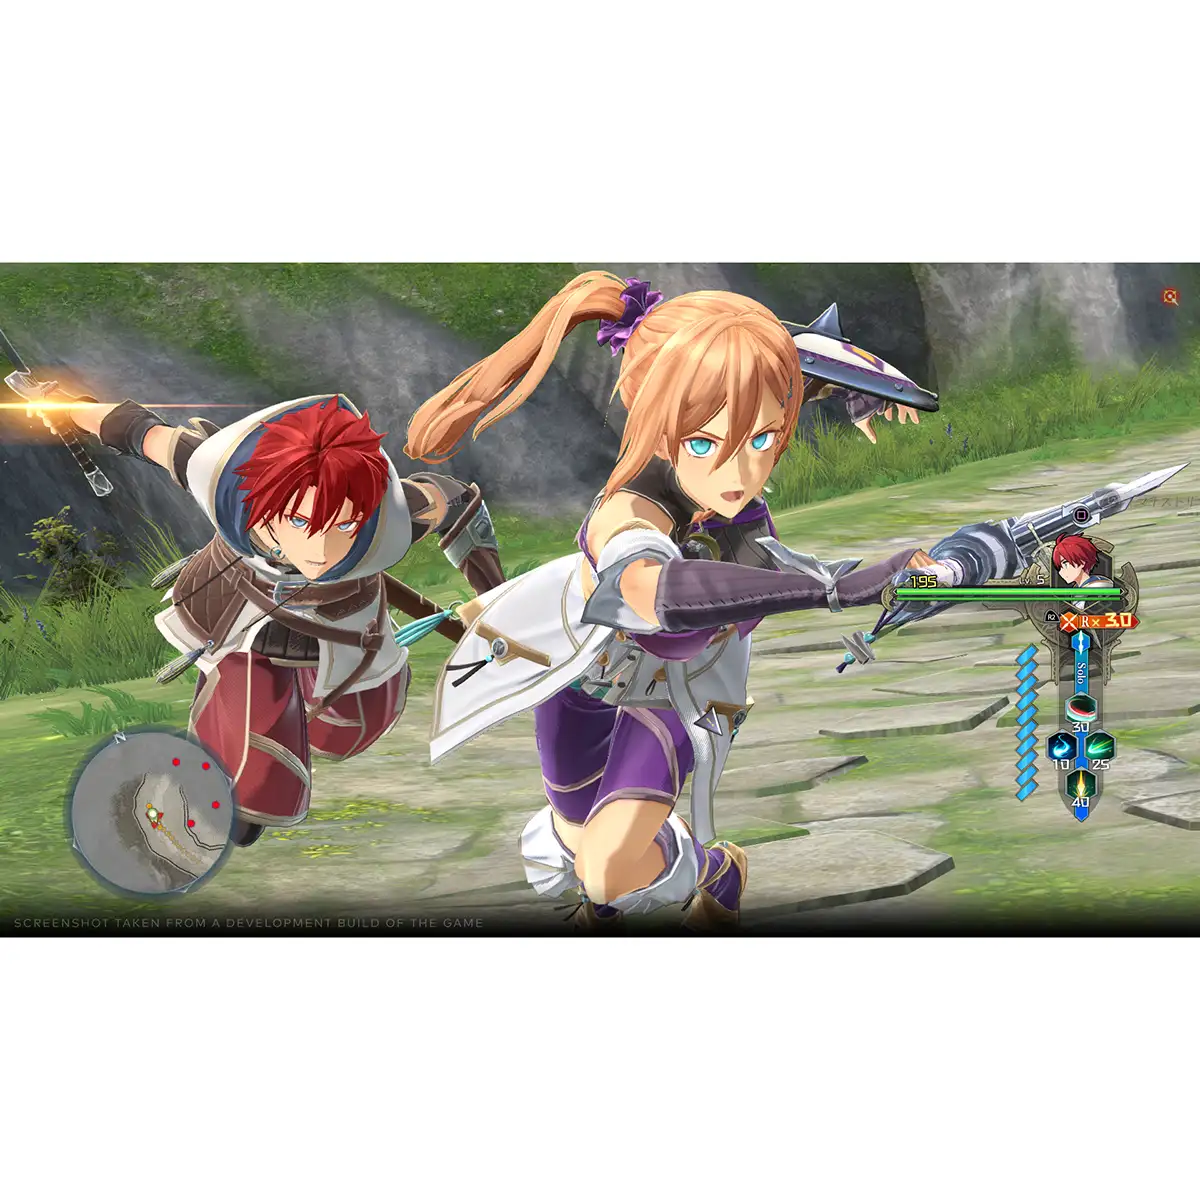 Ys X: Nordics - Deluxe Edition (PS4) Image 9